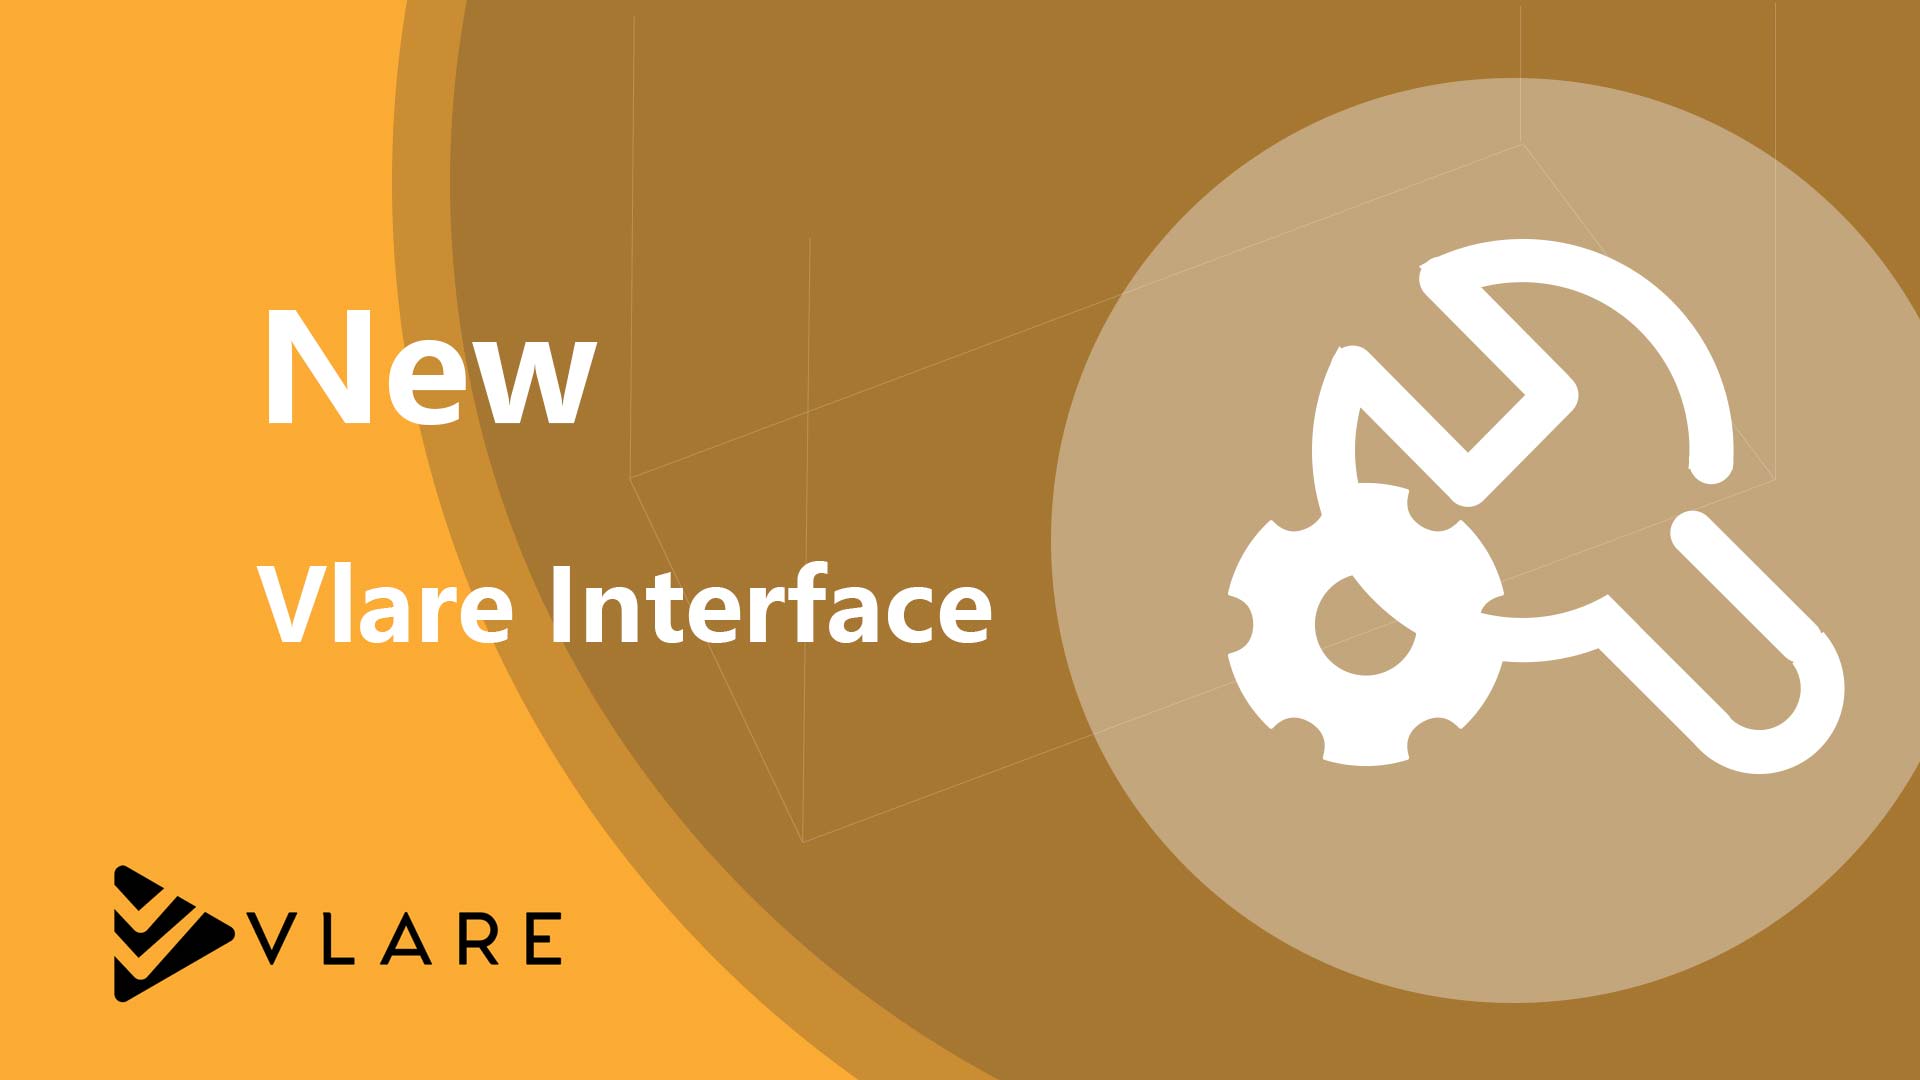 An In-depth Guide to the New Vlare Interface